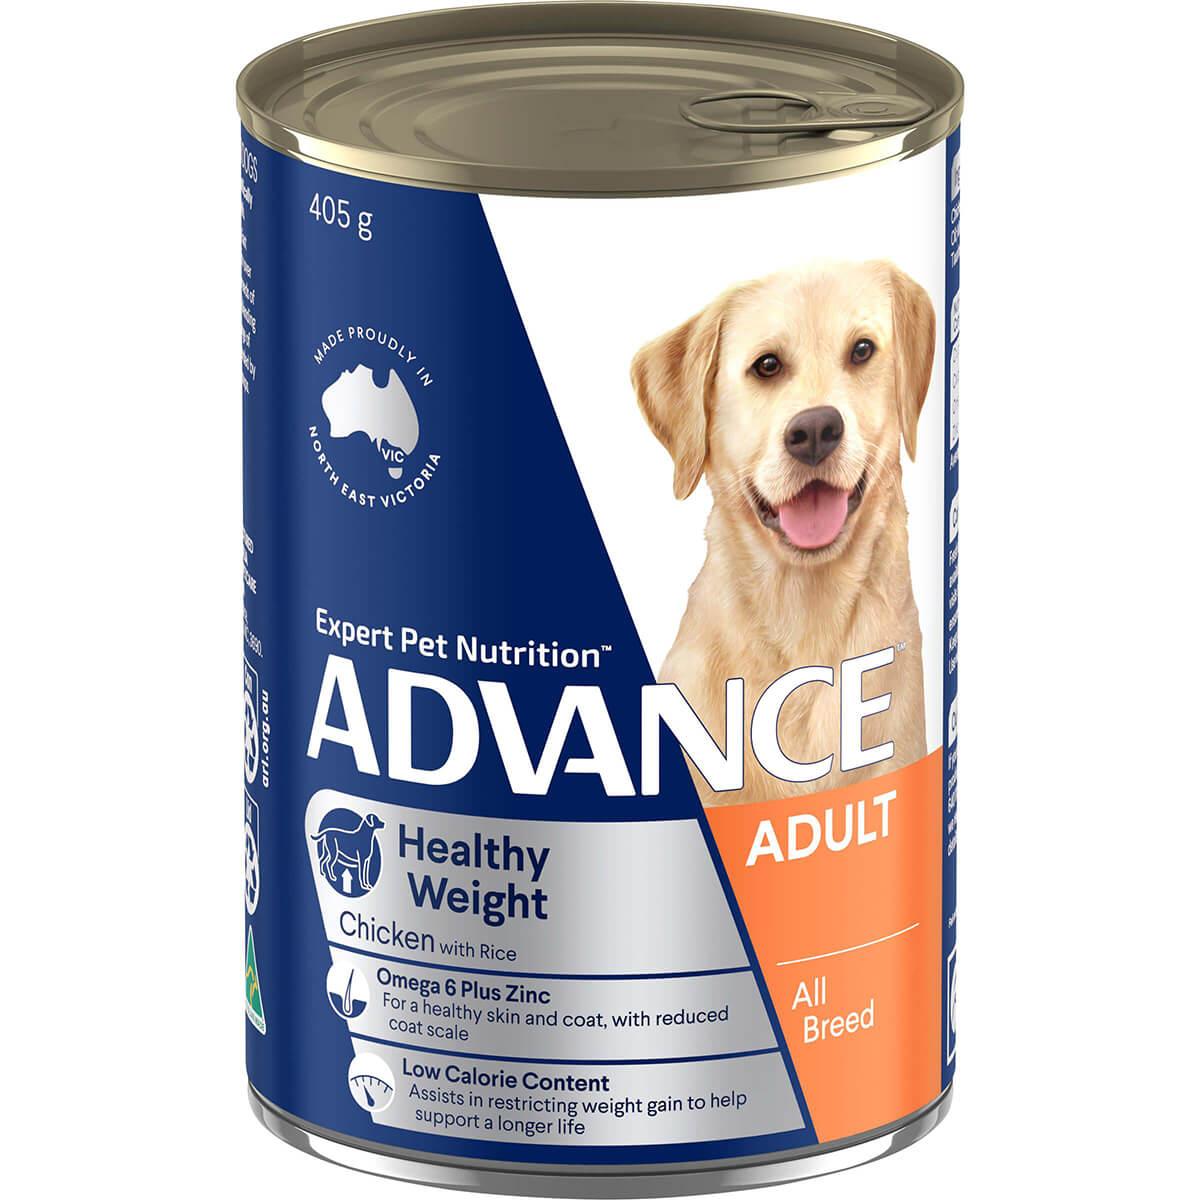 Advance Weight Control Adult Chicken Wet Dog Food